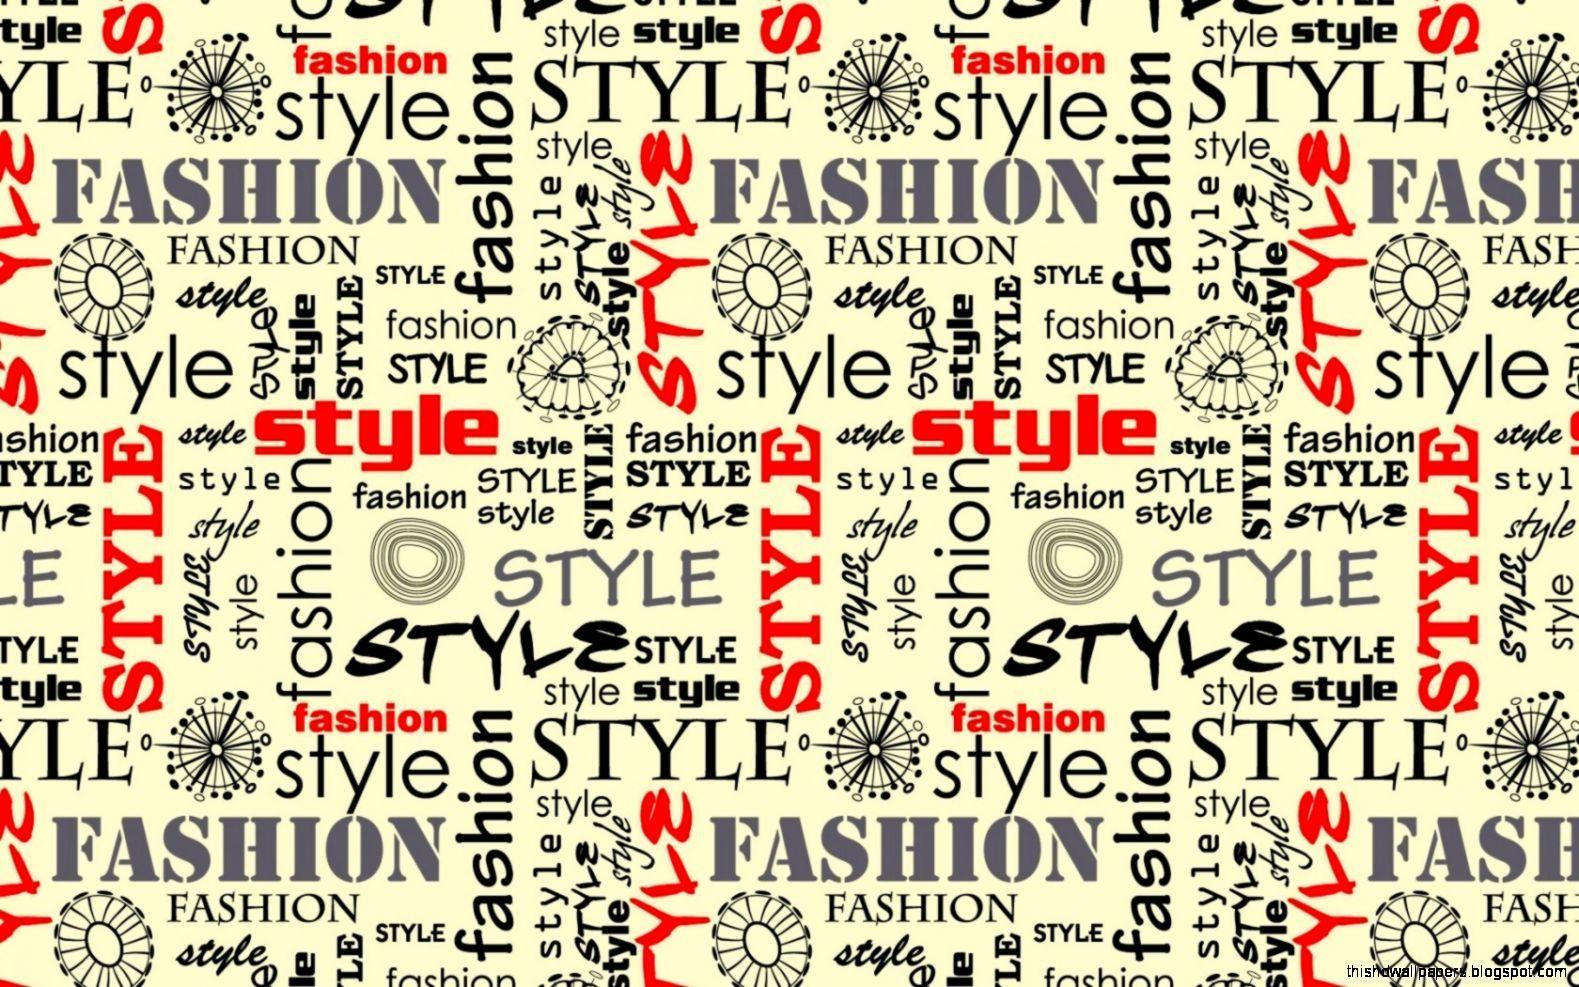 Letters In Style HD Image Fashion Style Words Letters HD Wallpaper